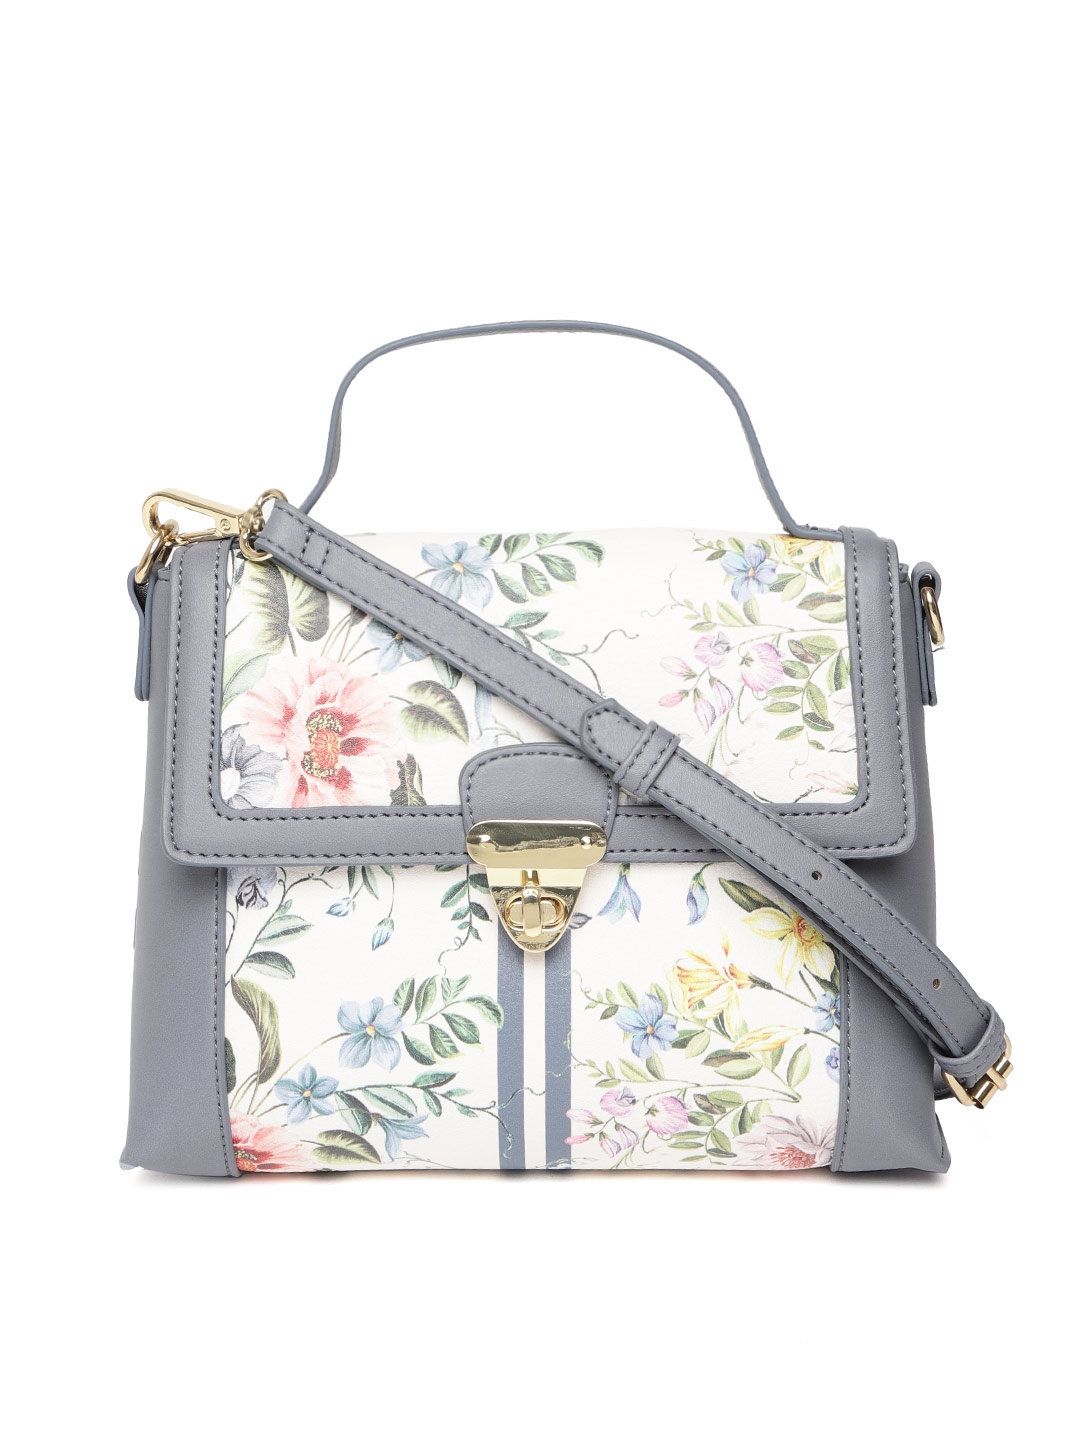 Buy Accessorize Off White & Grey Floral Print Satchel - Handbags for ...